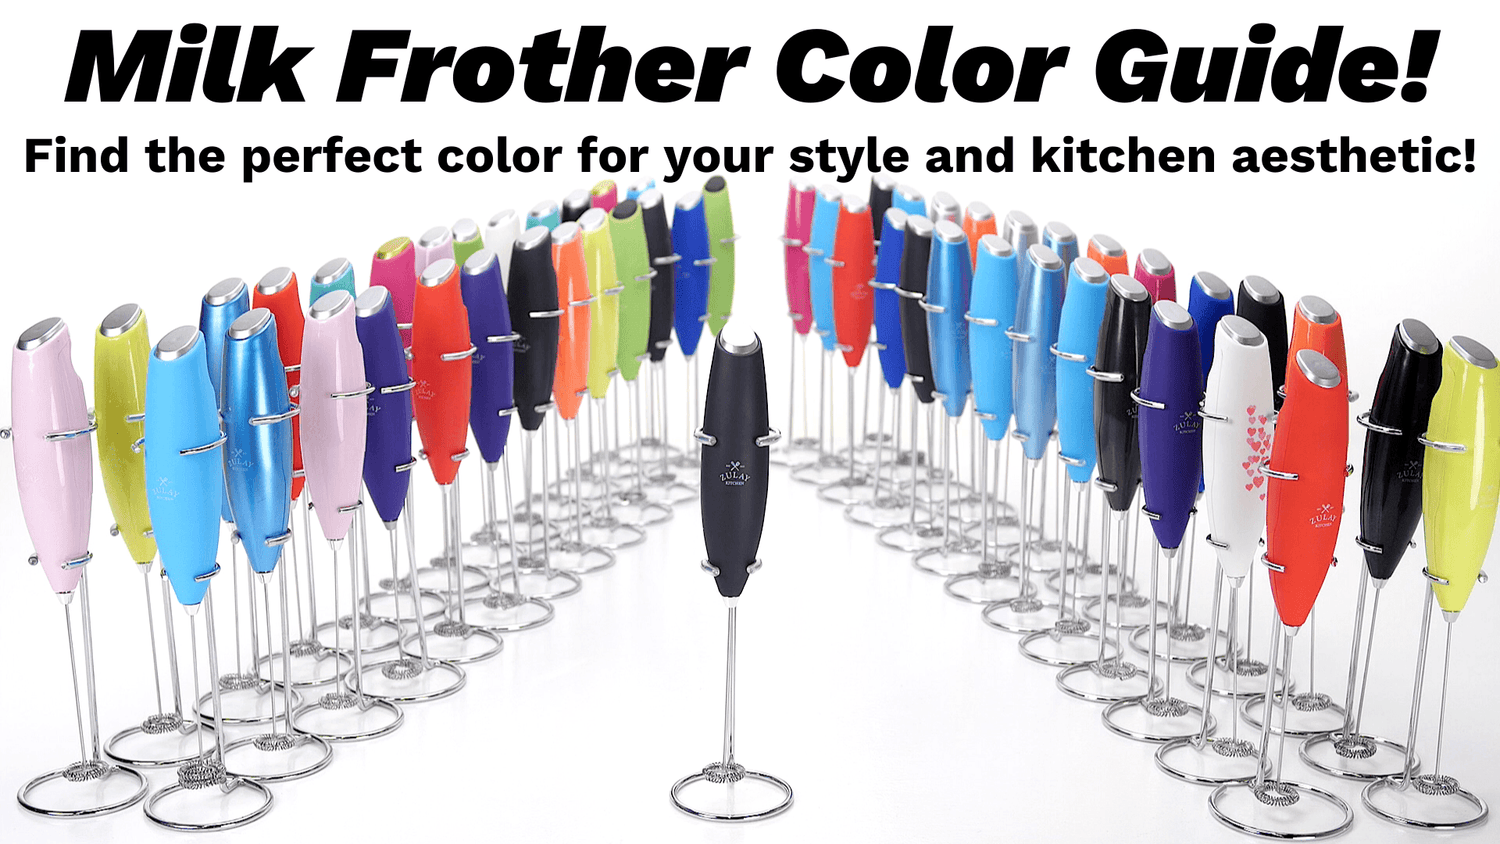 The Official Milk Boss Milk Frother Color Guide!